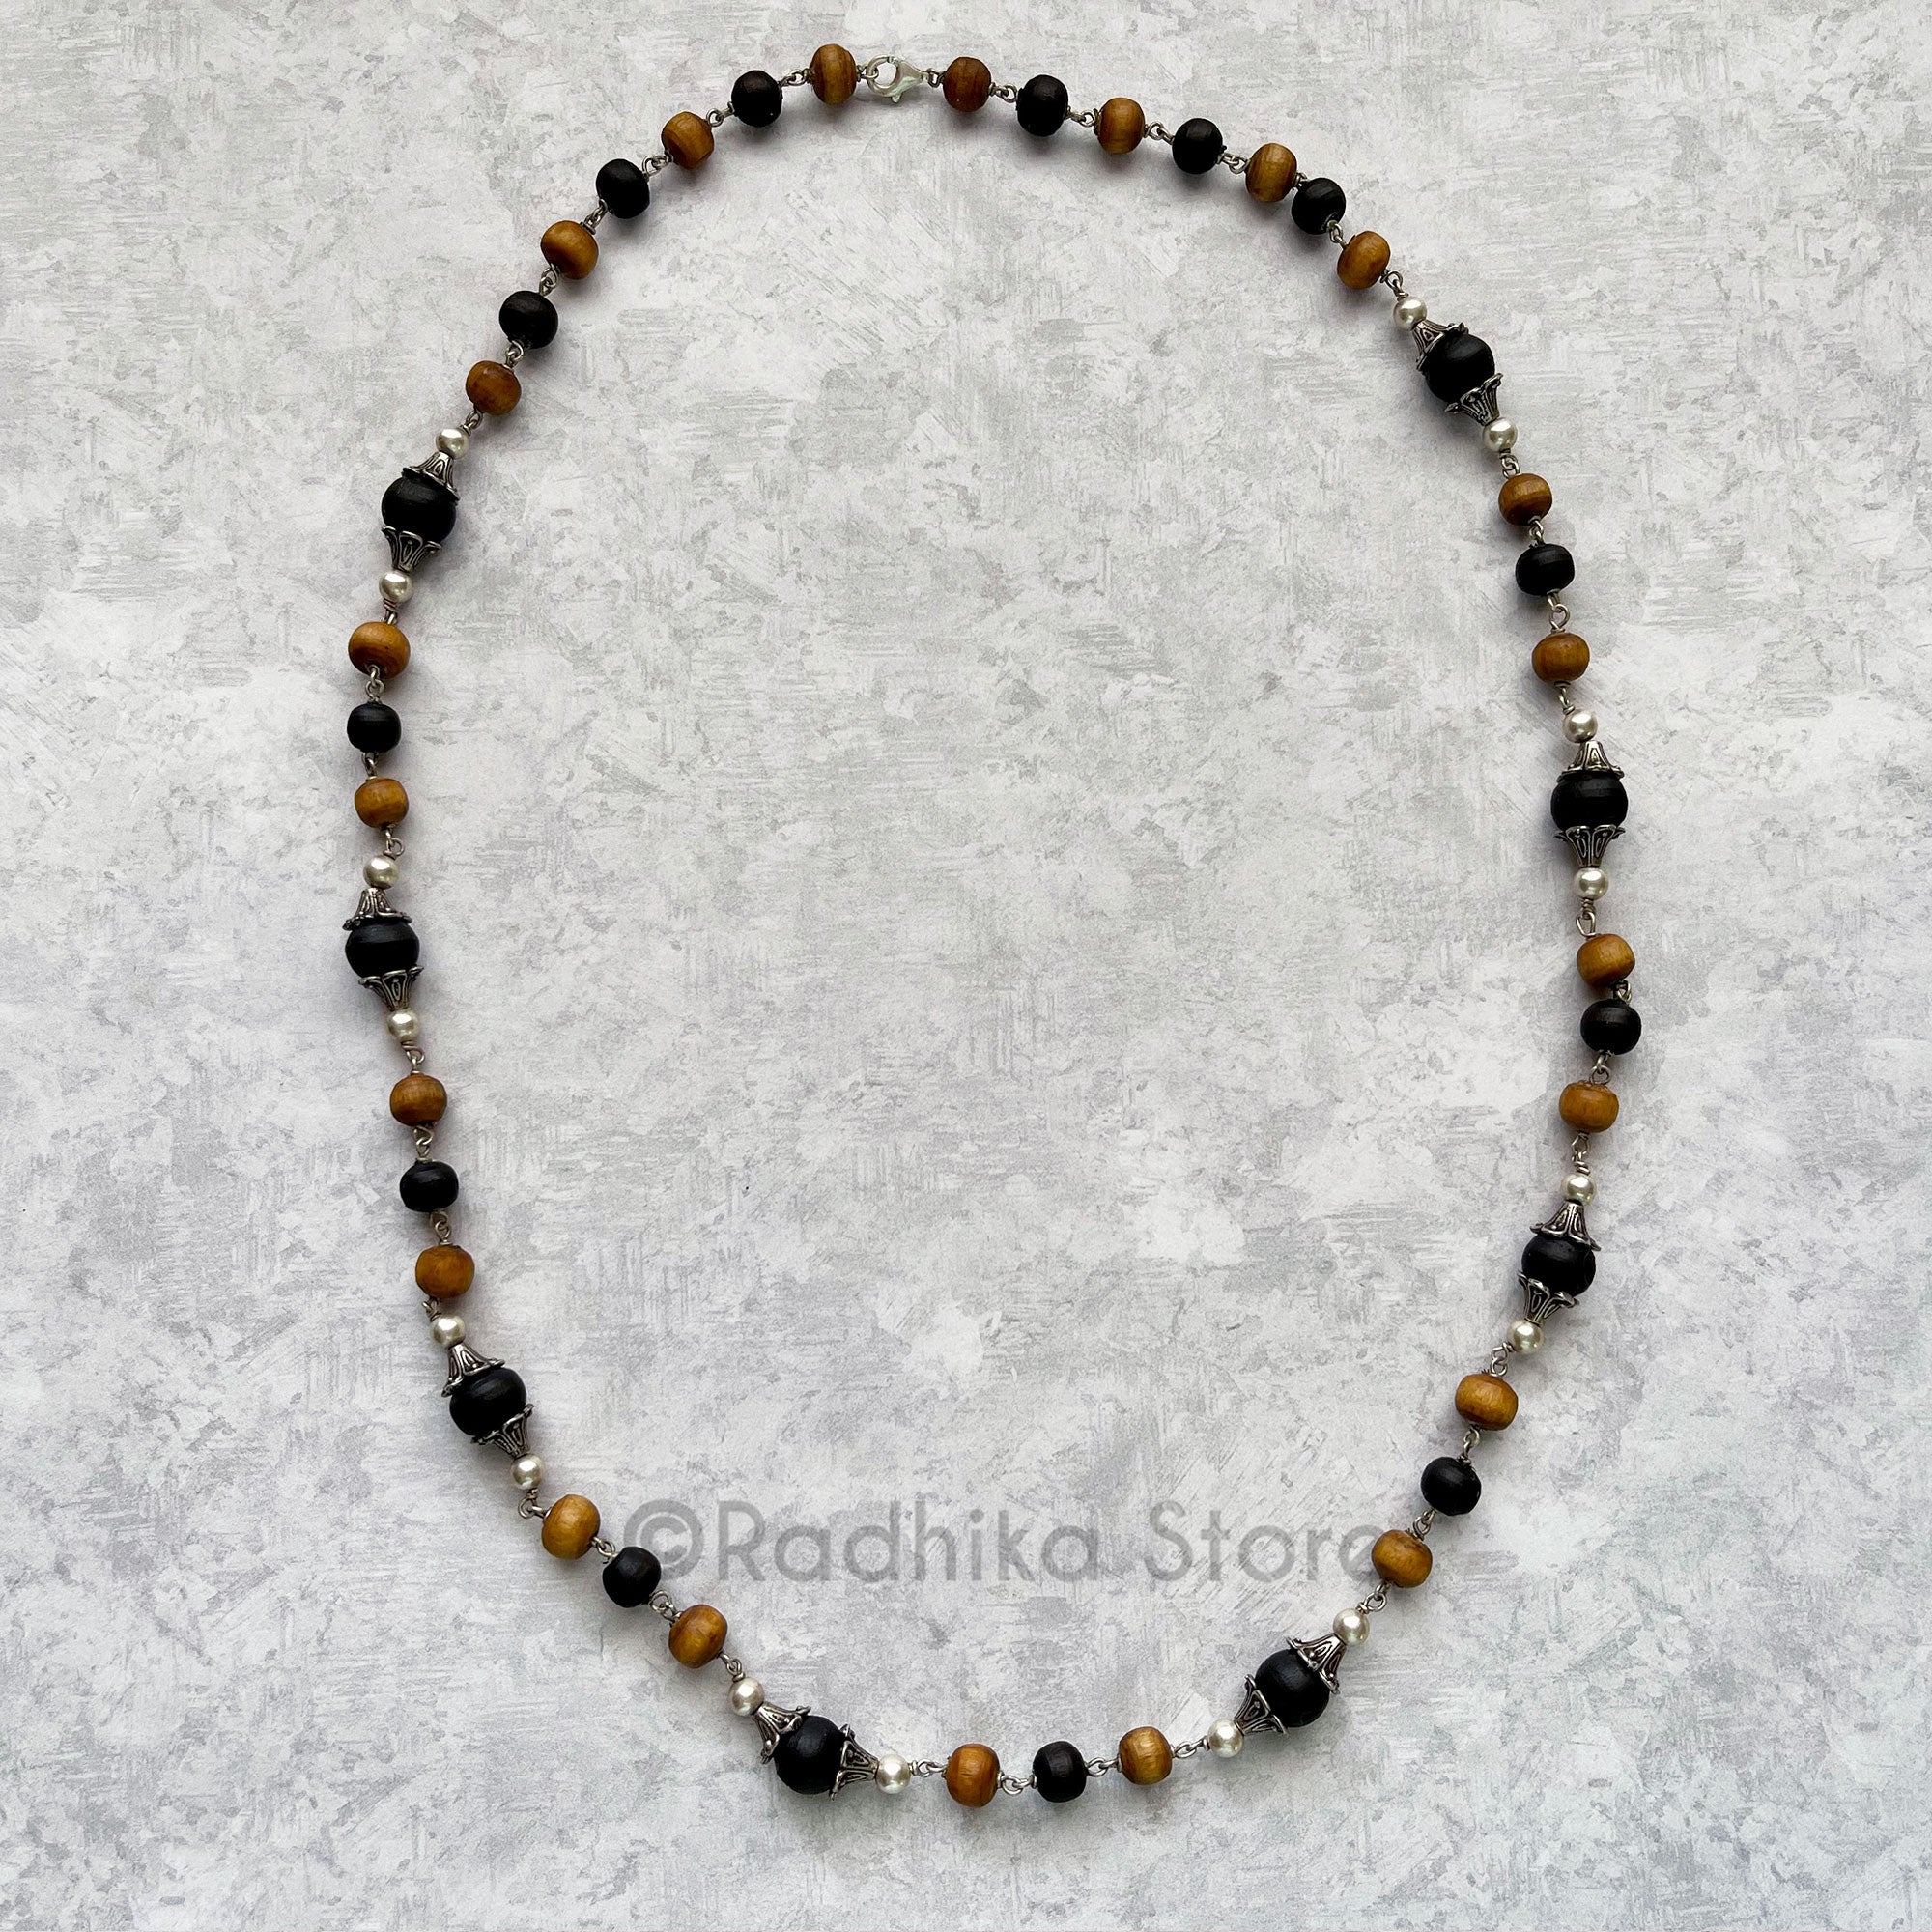 Exclusive design Black and Brown - Tulsi Silver Necklace 24.5 Inch